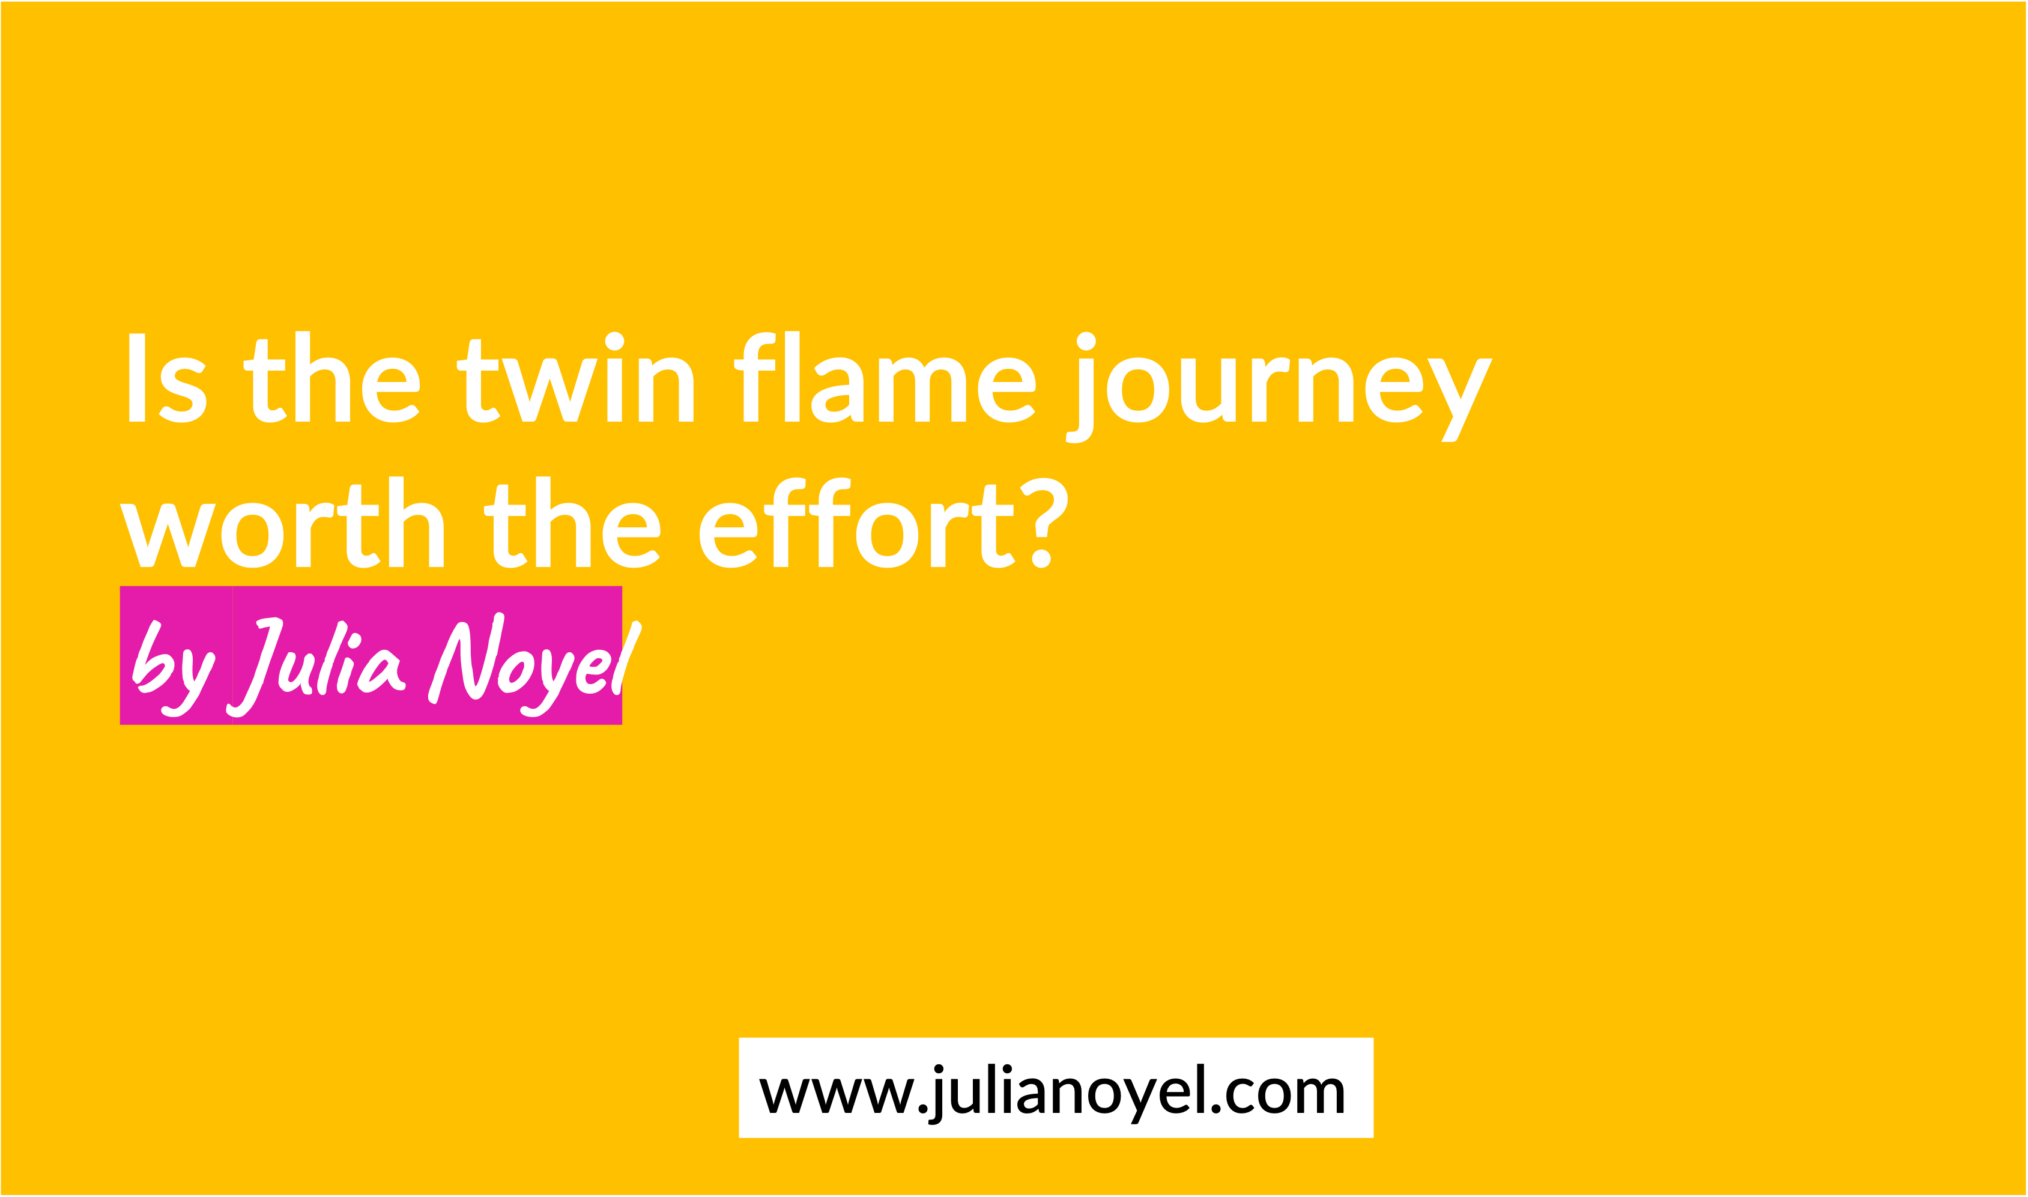 Is the twin flame journey worth the effort? by Julia Noyel